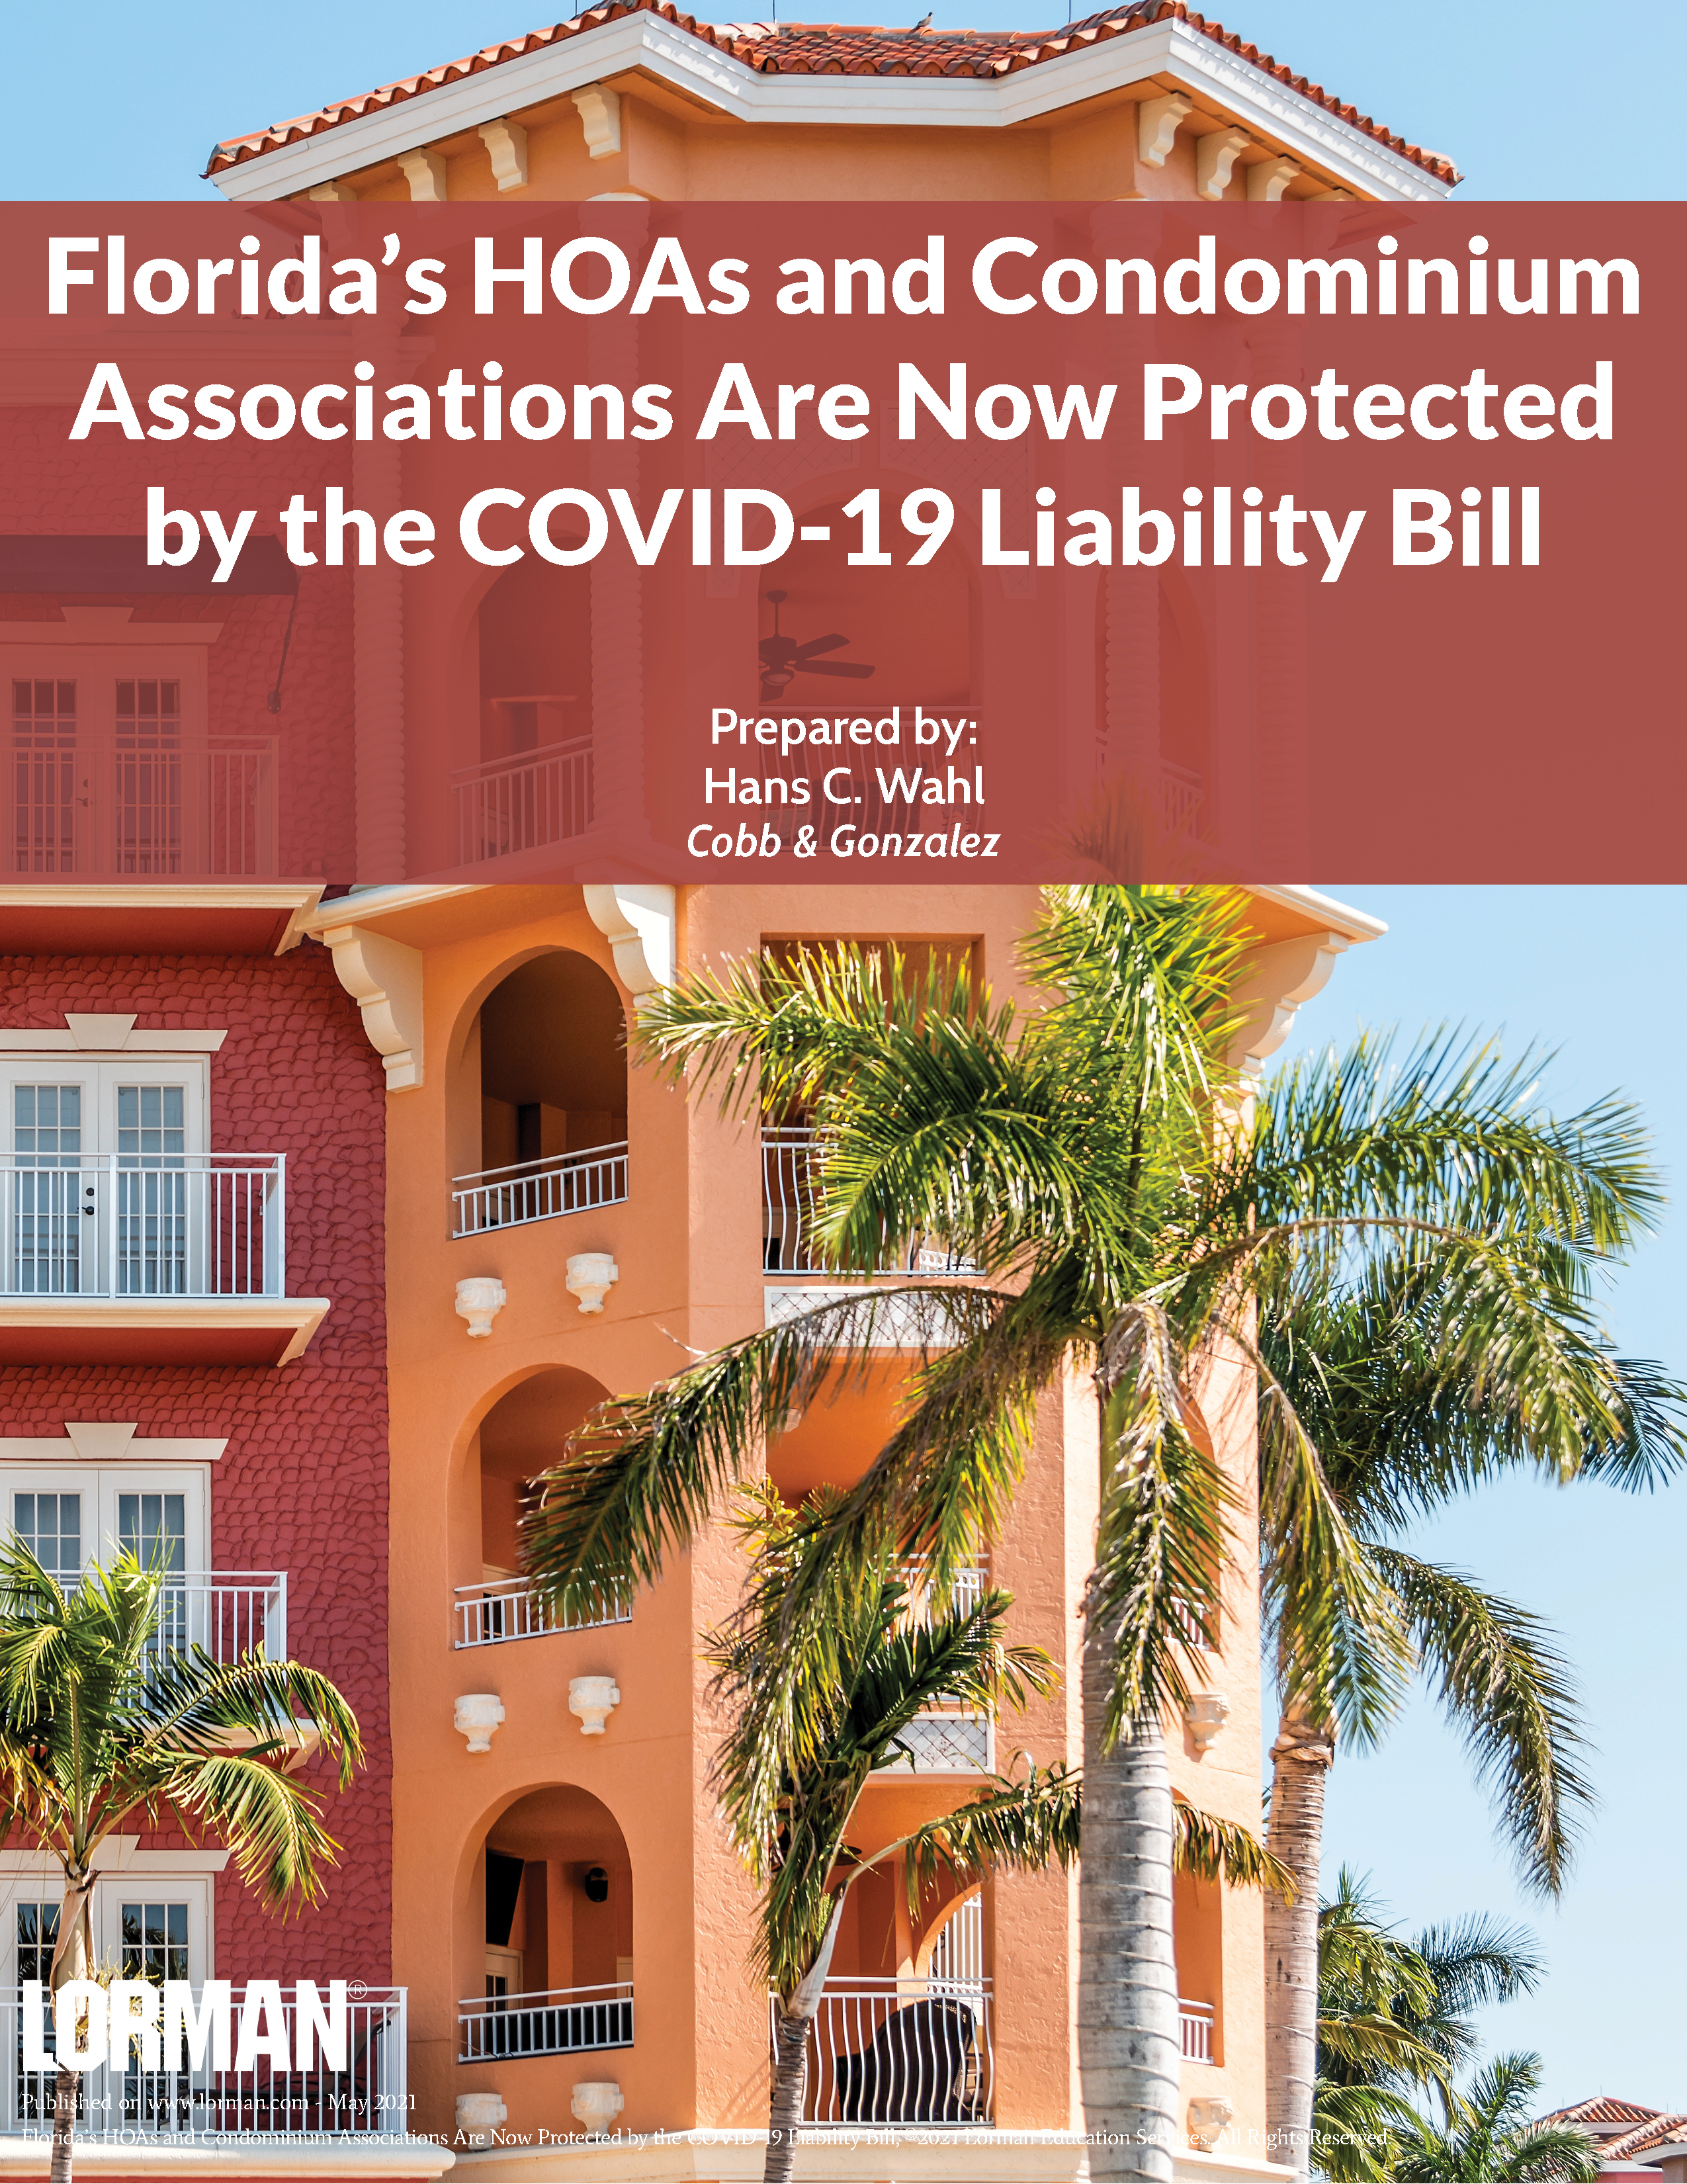 Florida's HOAs and Condominium Associations Are Now Protected by the COVID-19 Liability Bill